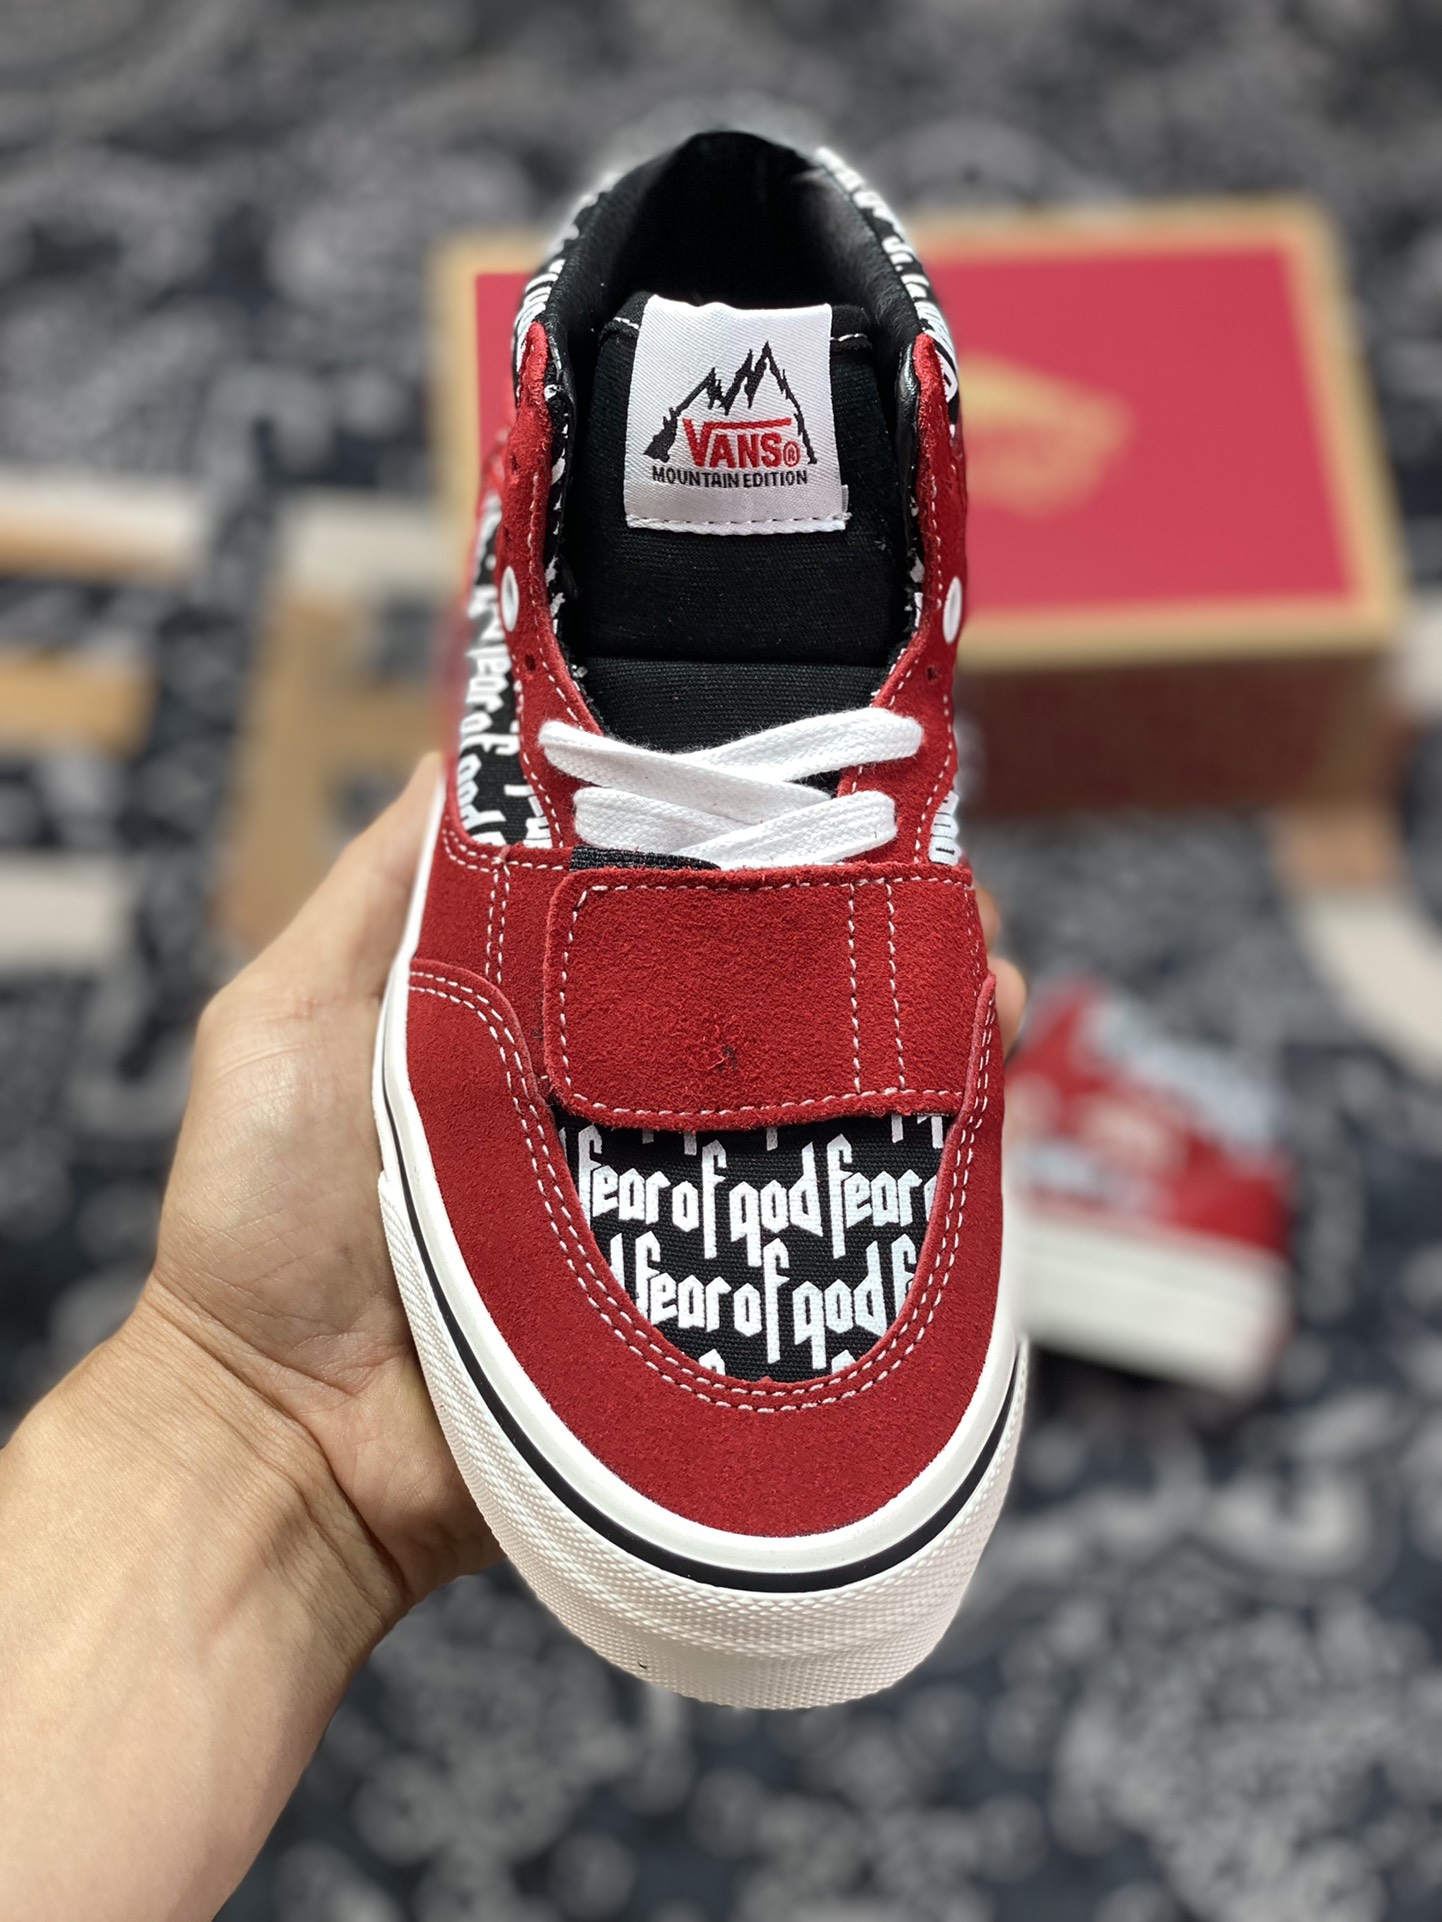 Fear Of God x Vans Mountain Edition joint Velcro stitching black and red casual skate shoes